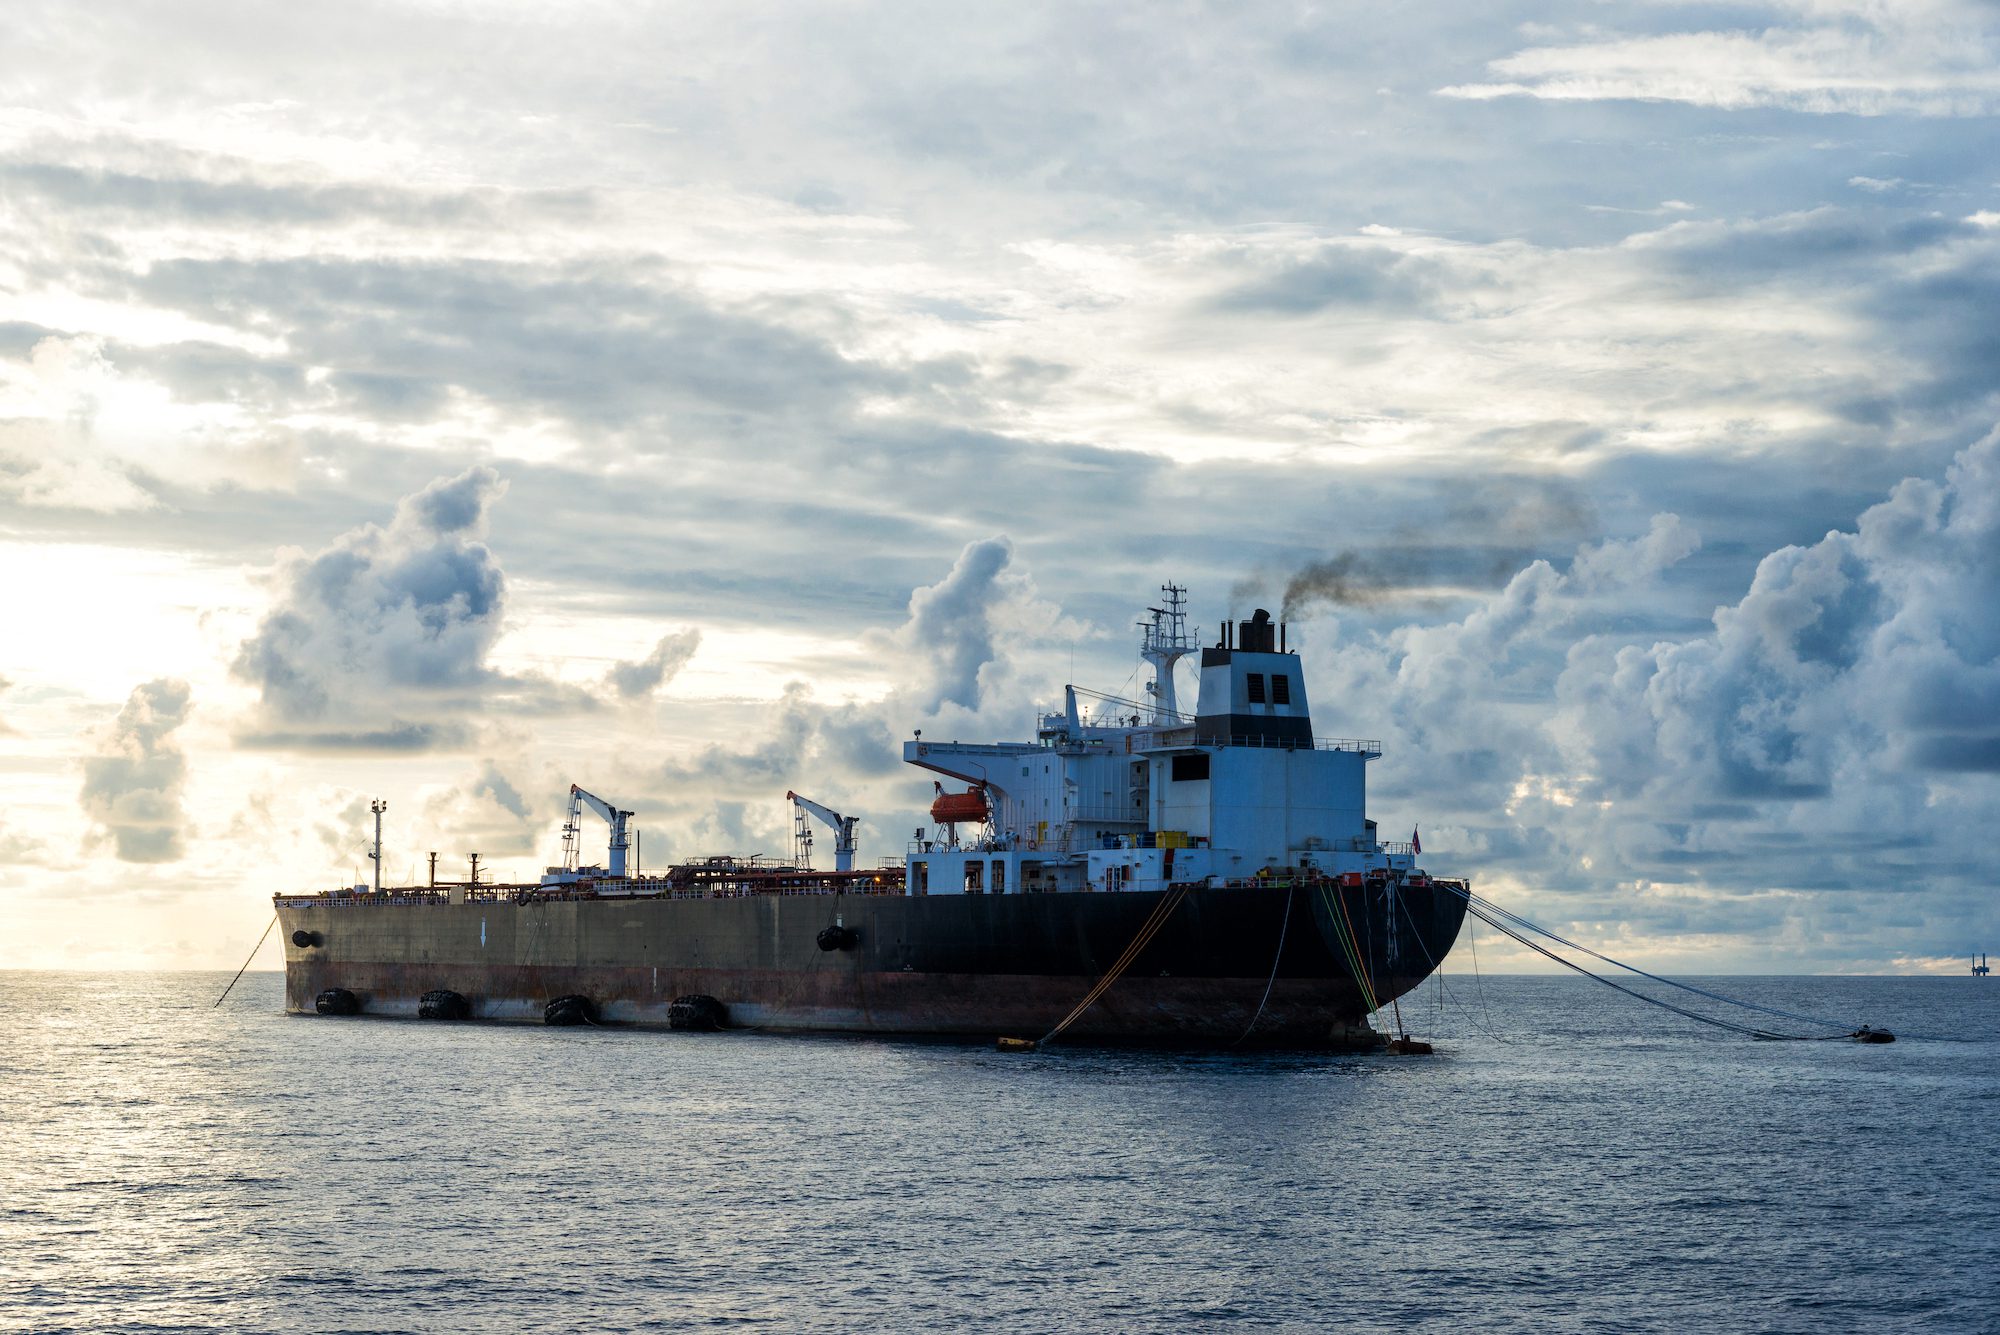 Stock photo of an oil tanker moored at sea